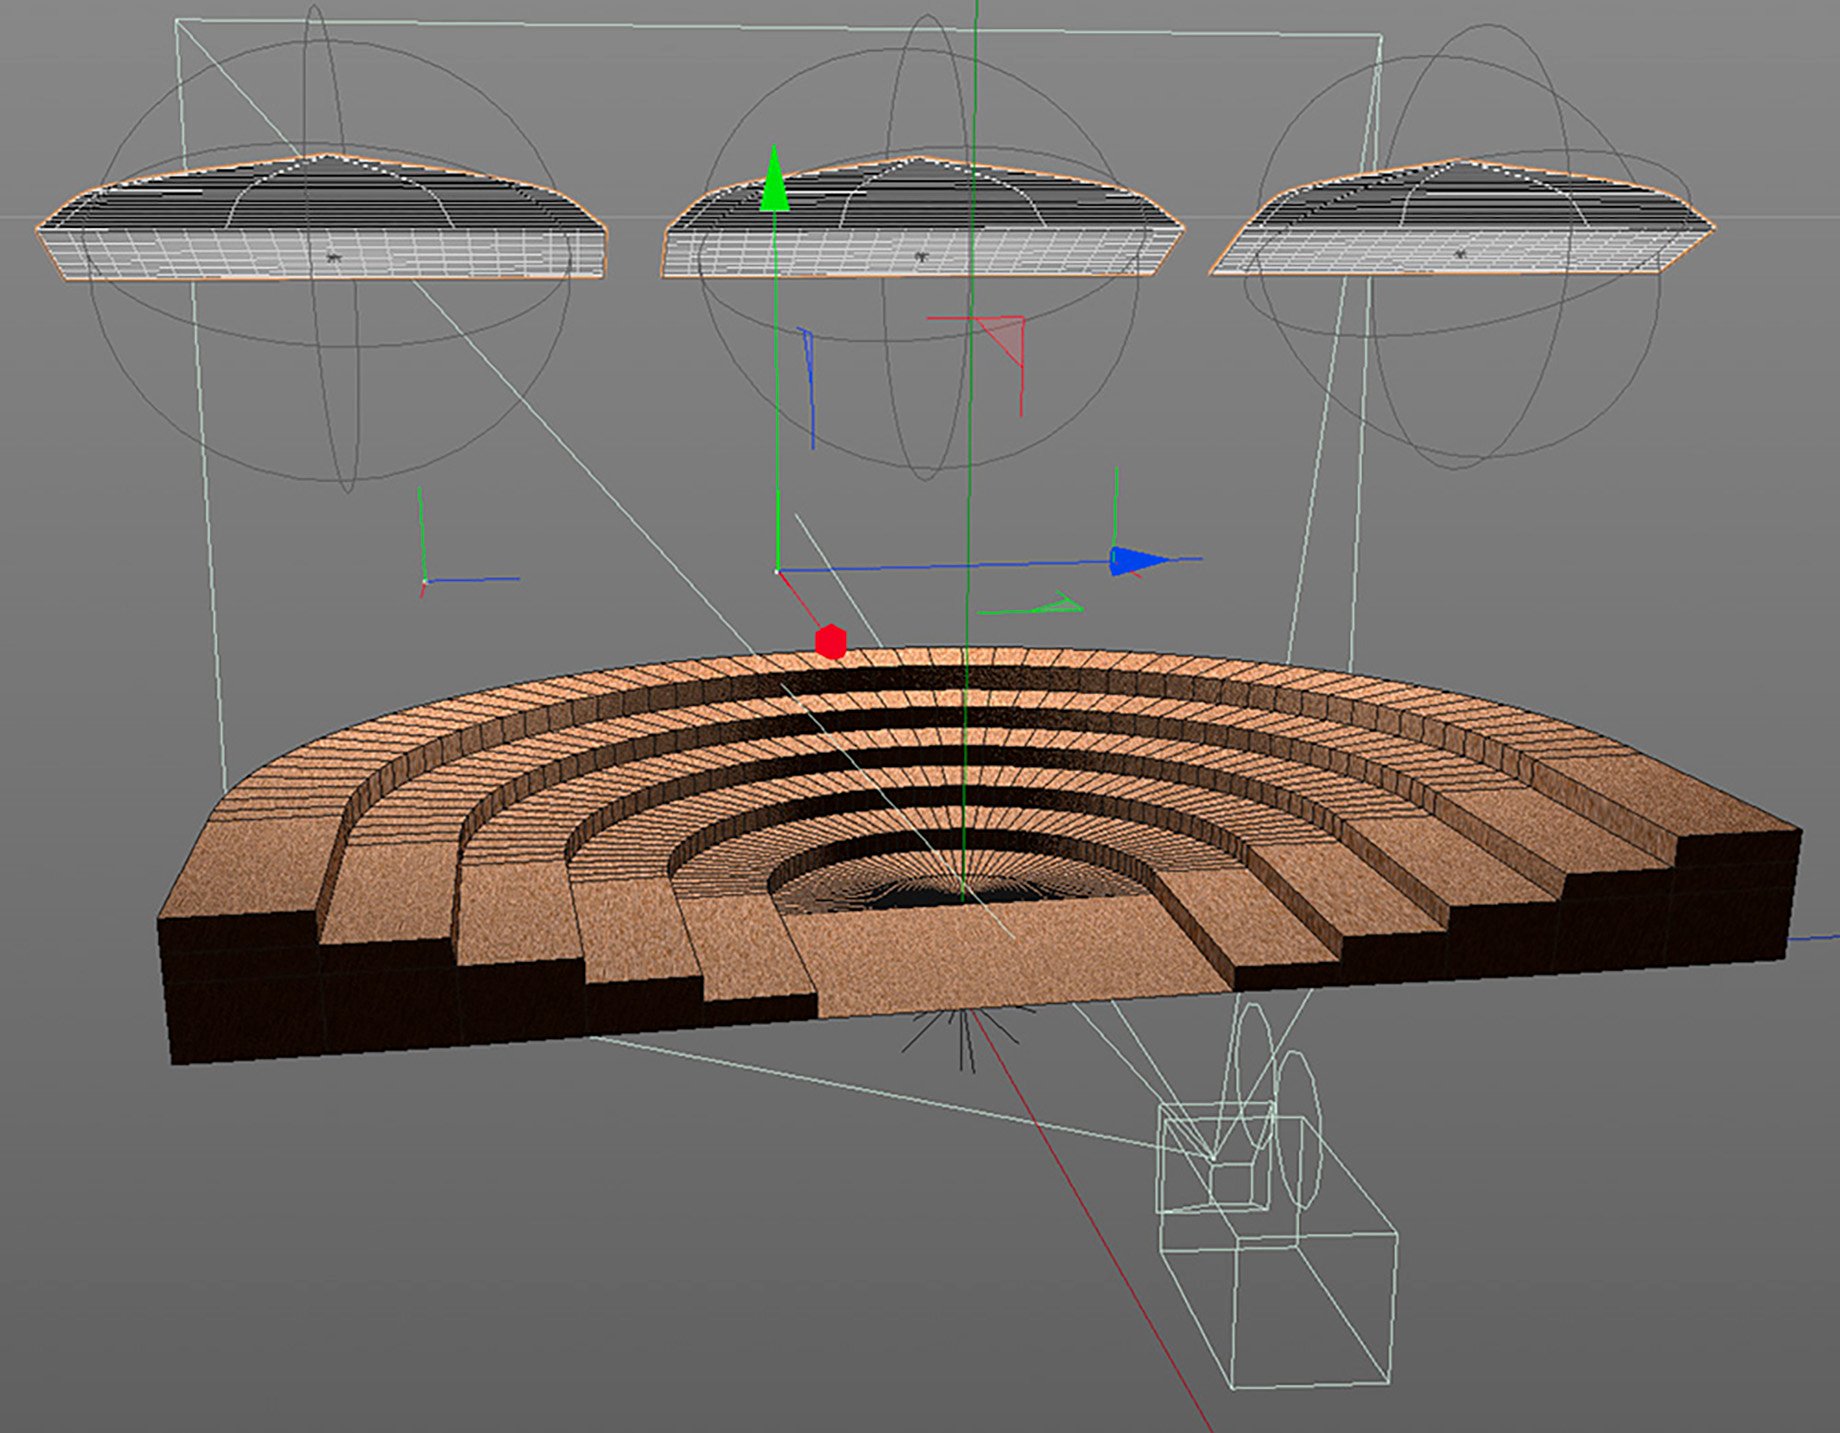 3D model of tiered stage for symphony created by John Fulton for HondaJet Wings campaign.